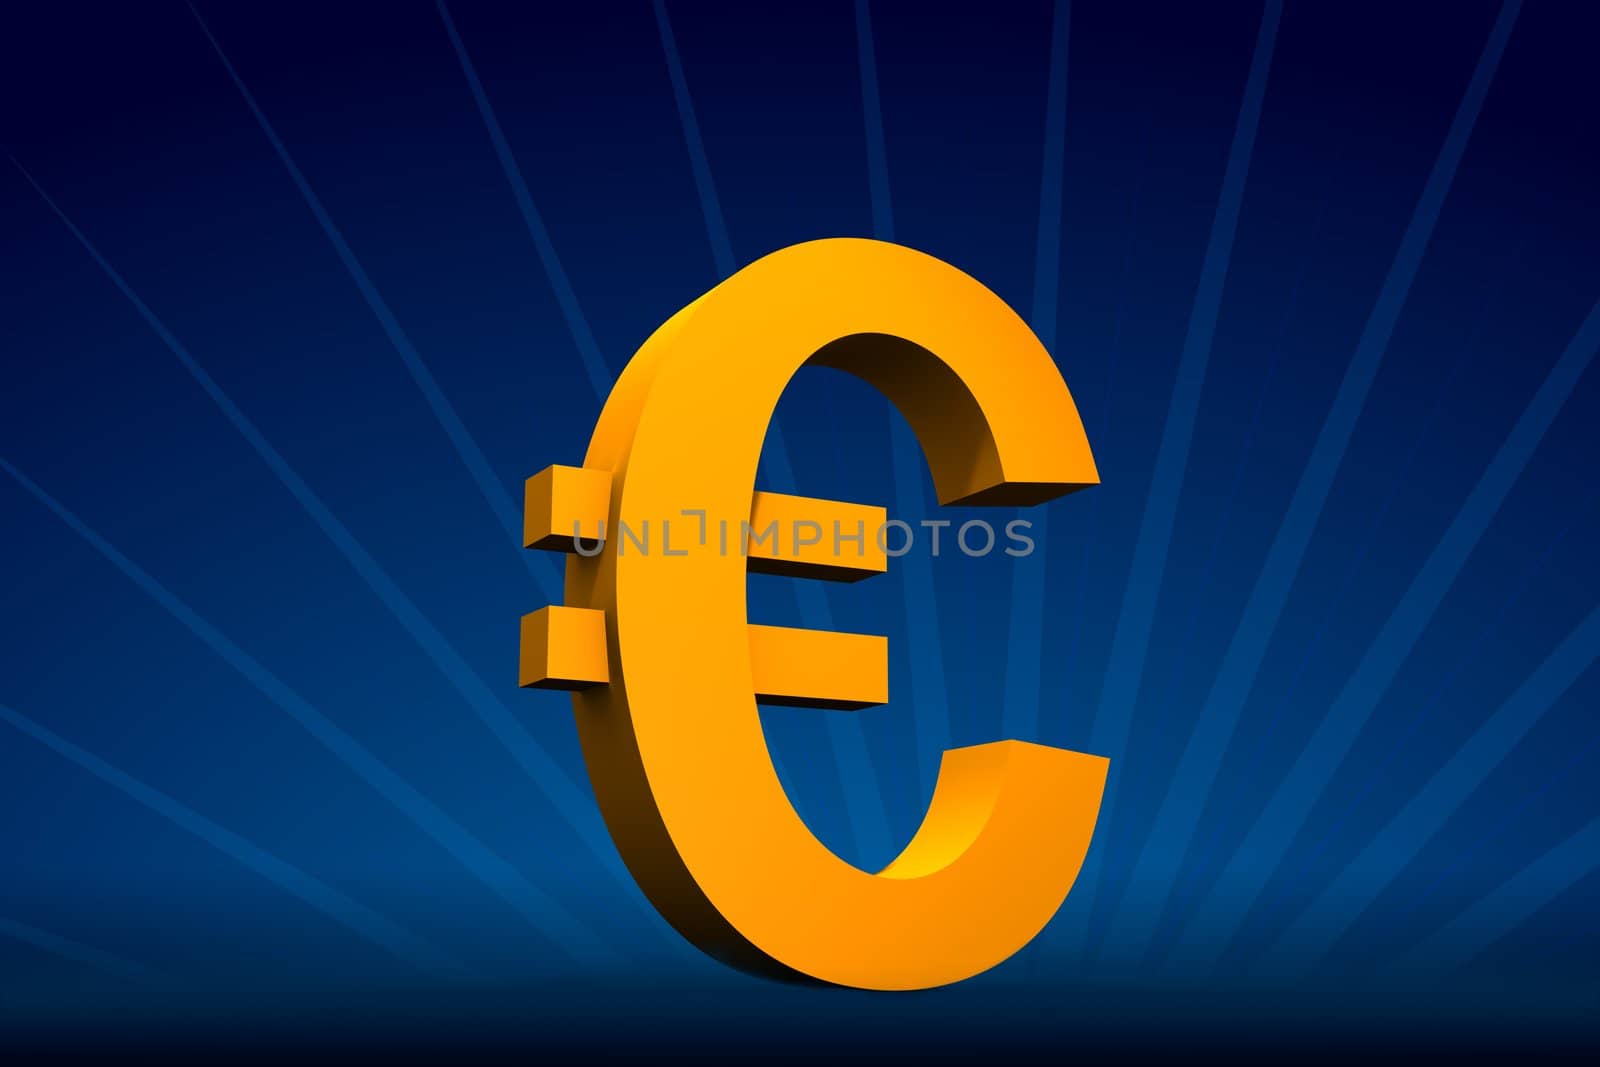 Euro symbol by hamster3d